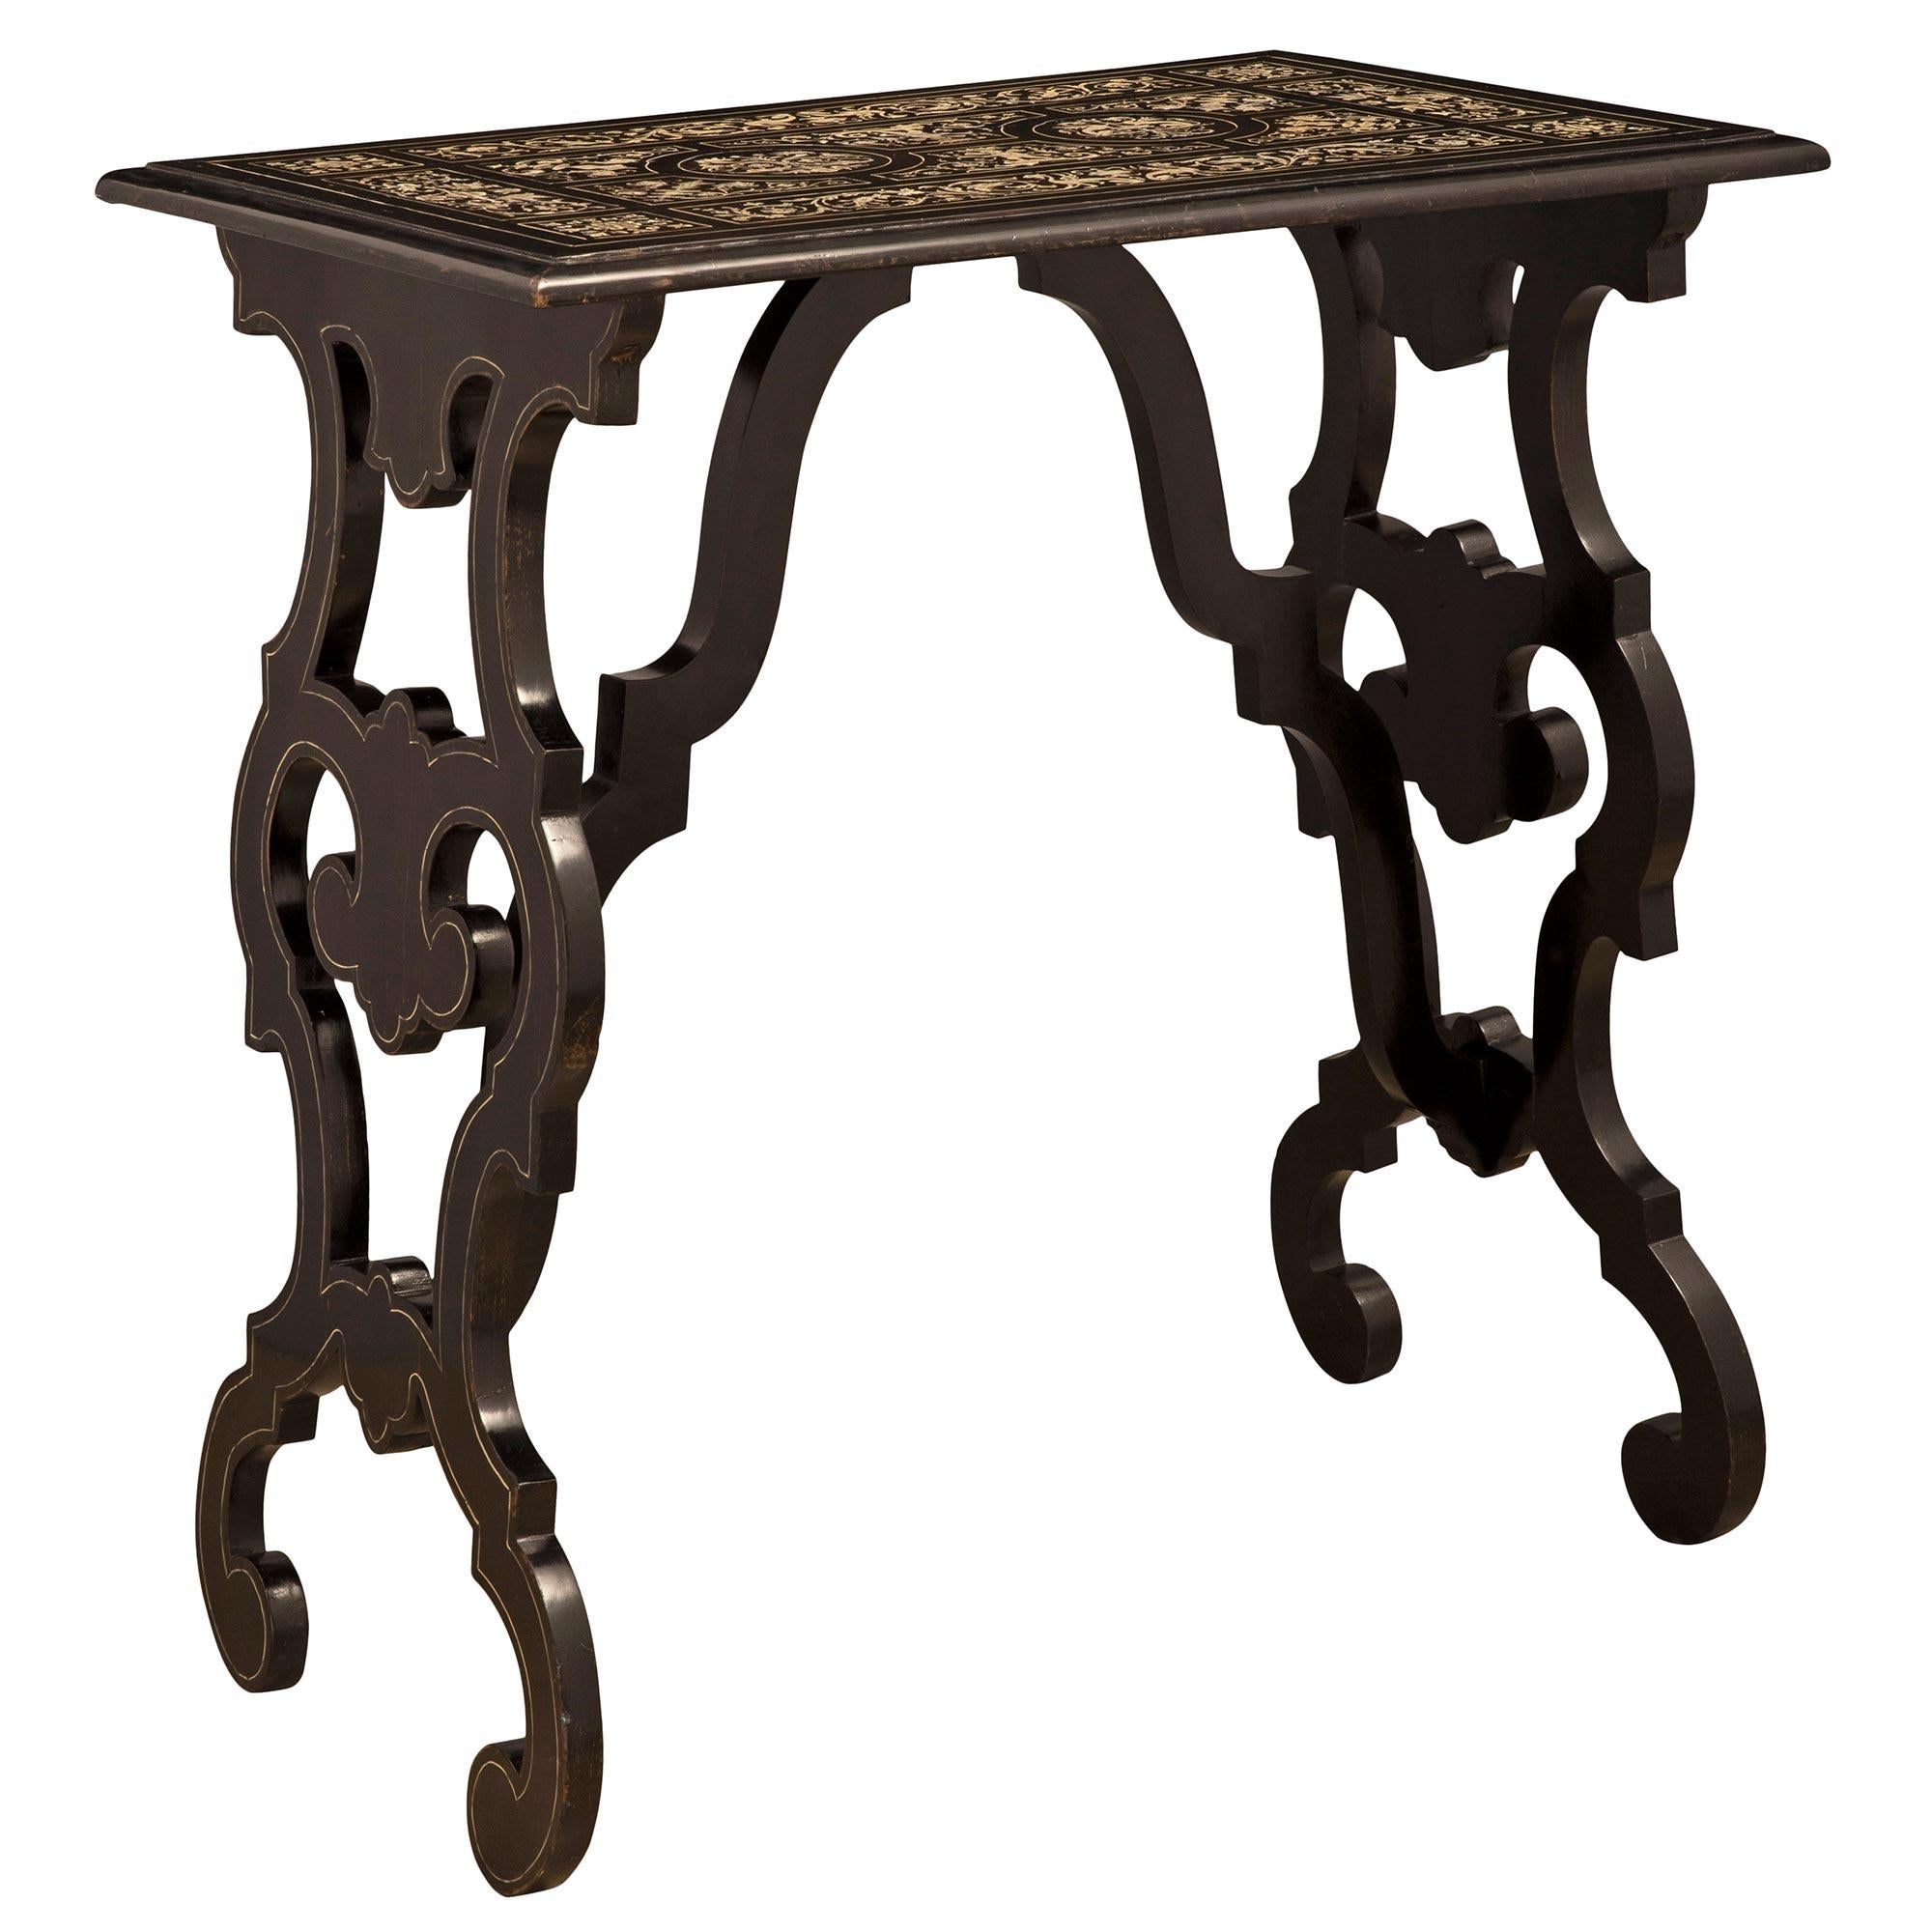 Italian 19th Century Ebony and Bone Trestle Table In Good Condition For Sale In West Palm Beach, FL